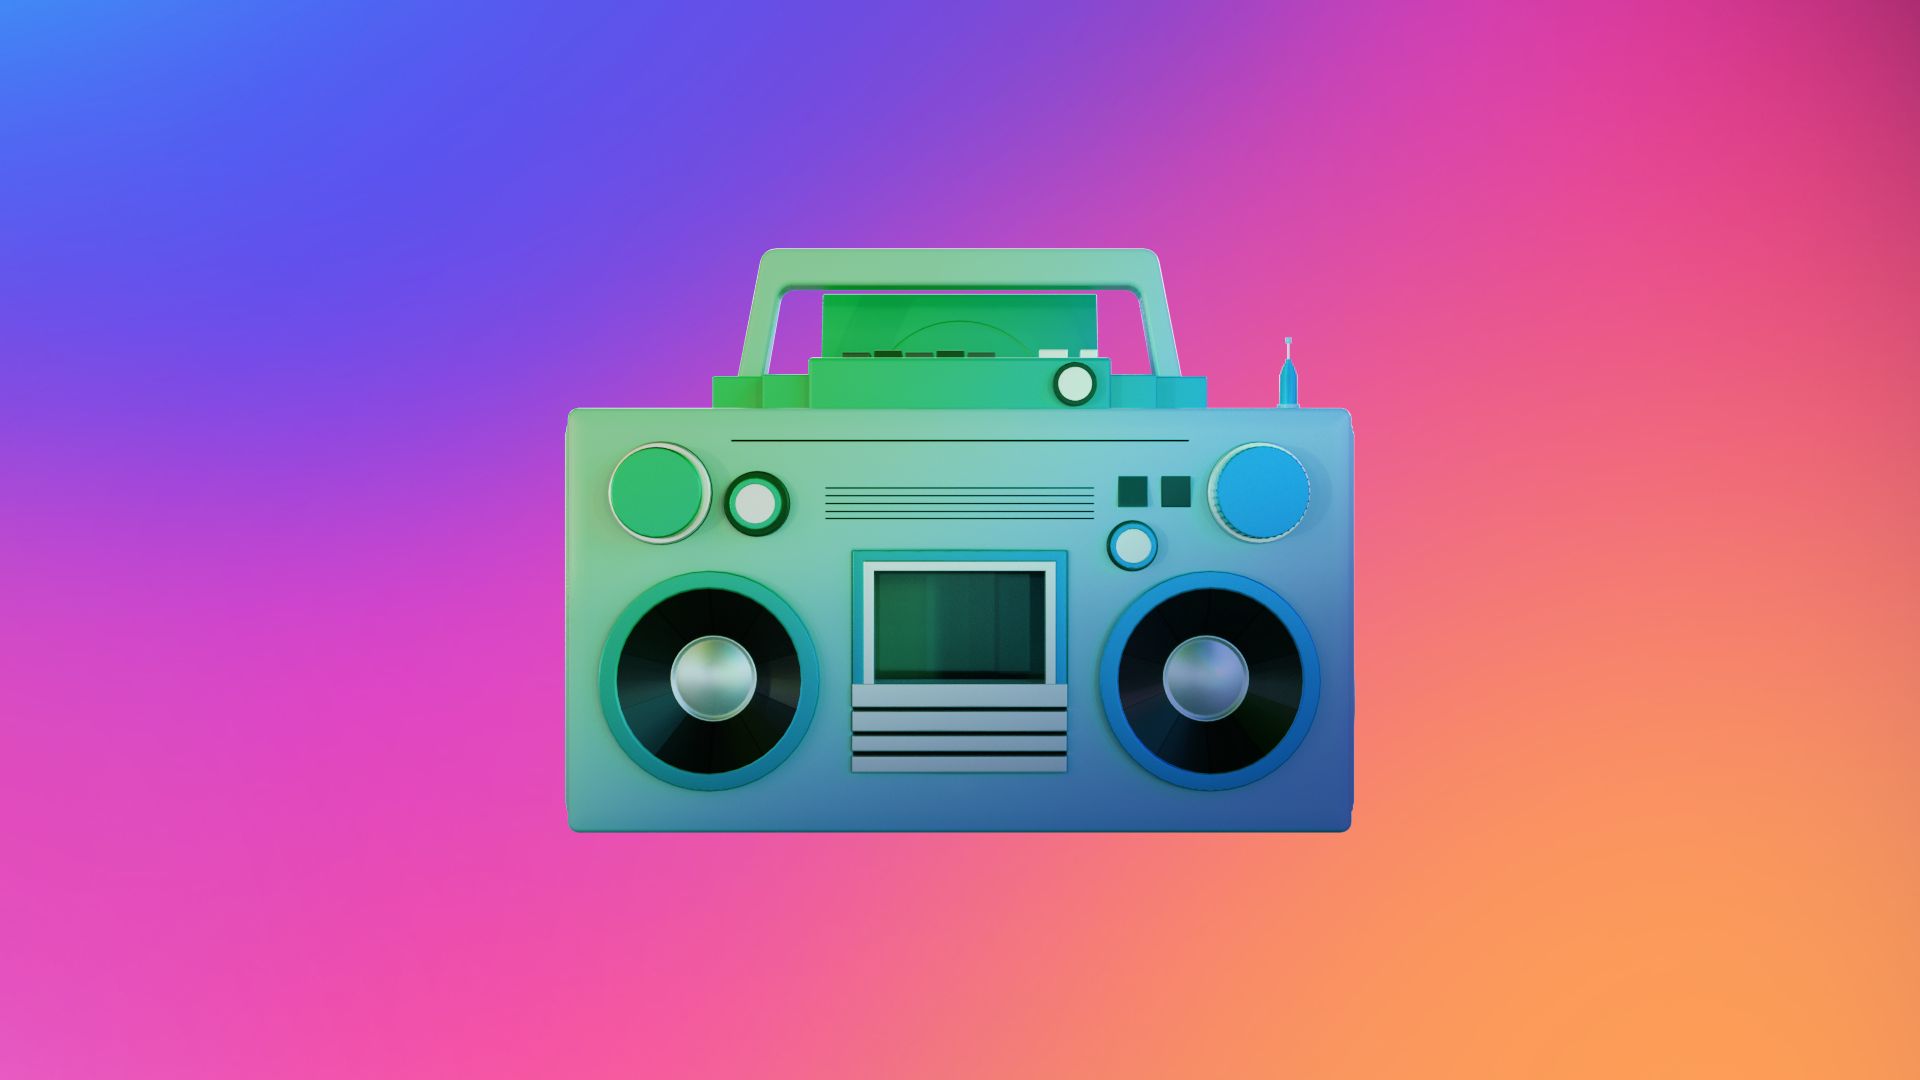 VBS_Boombox